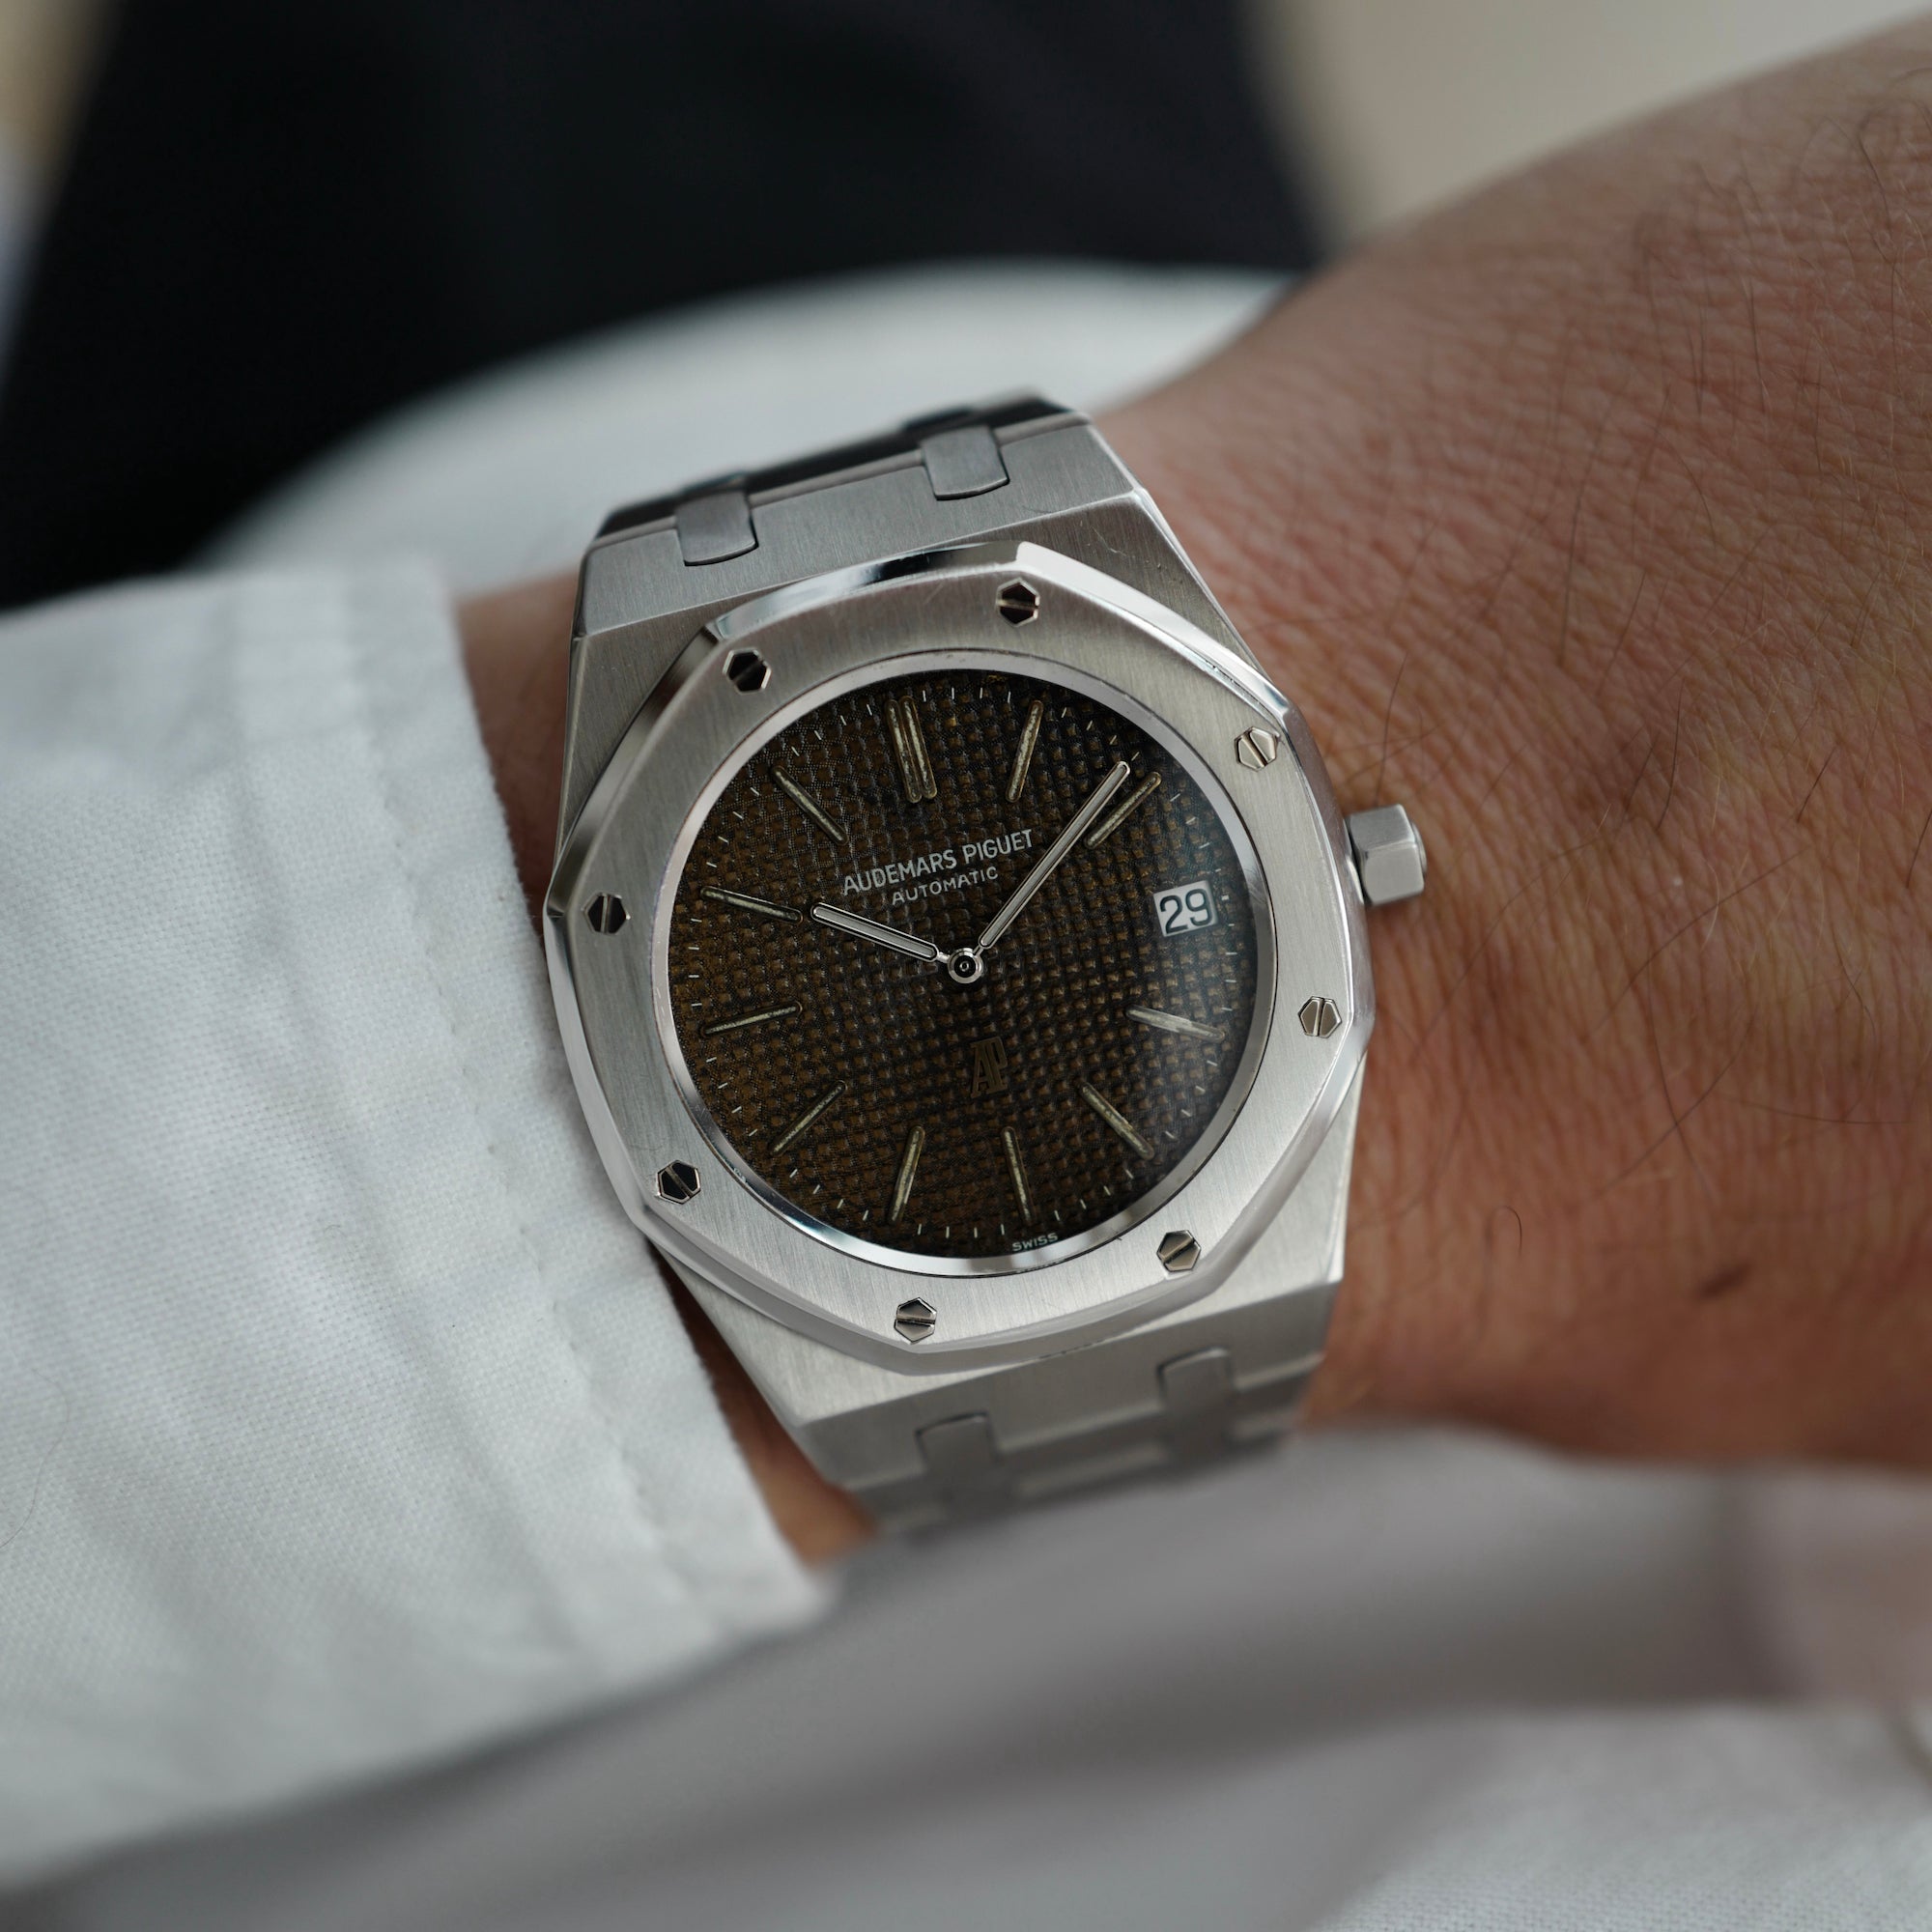 Audemars Piguet - Audemars Piguet Steel Royal Oak Ref. 5402 with Tropical Dial, with Box and Papers - The Keystone Watches